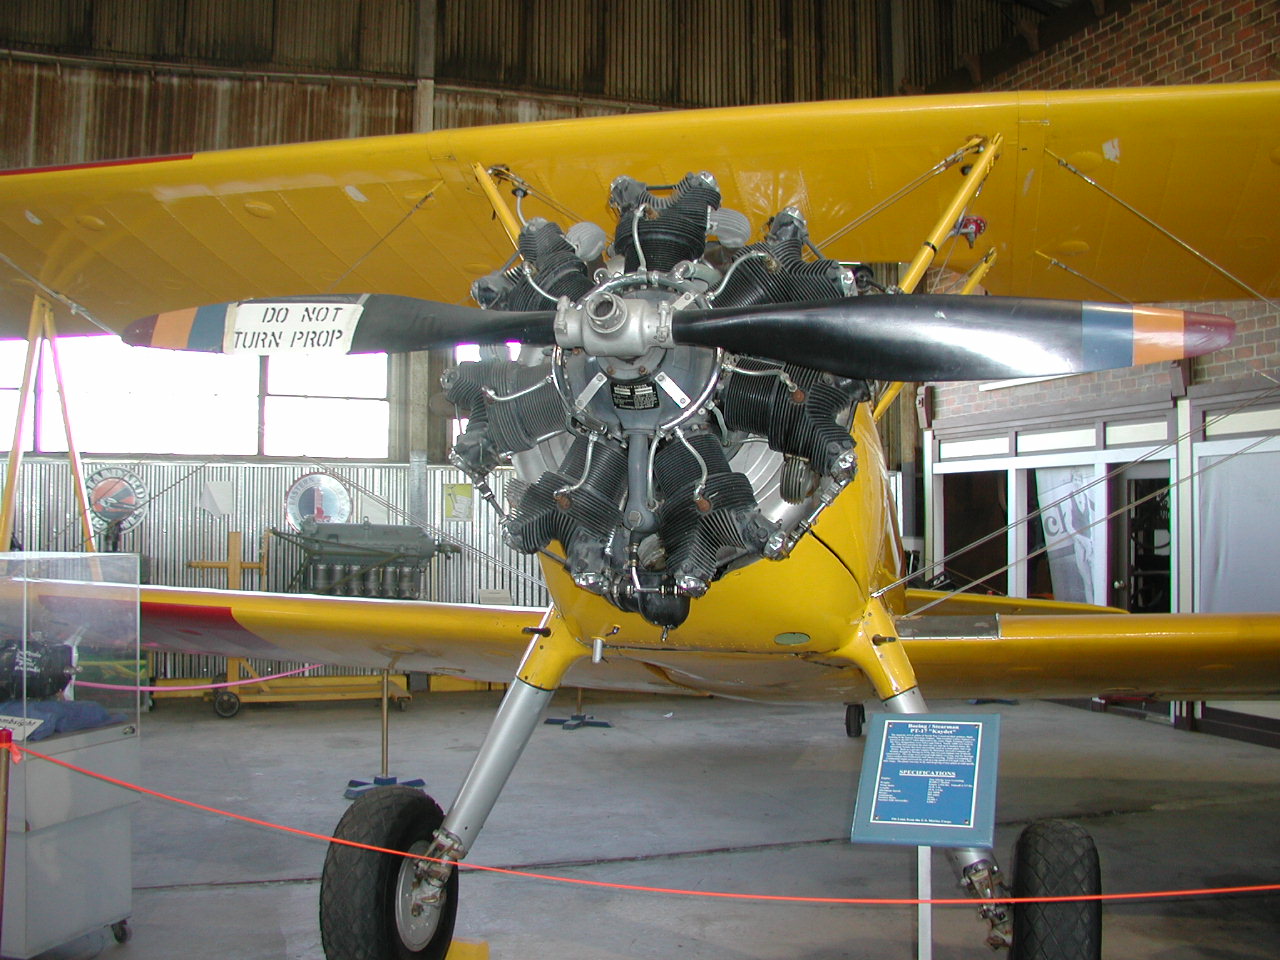 the airplane has been put up in an air museum